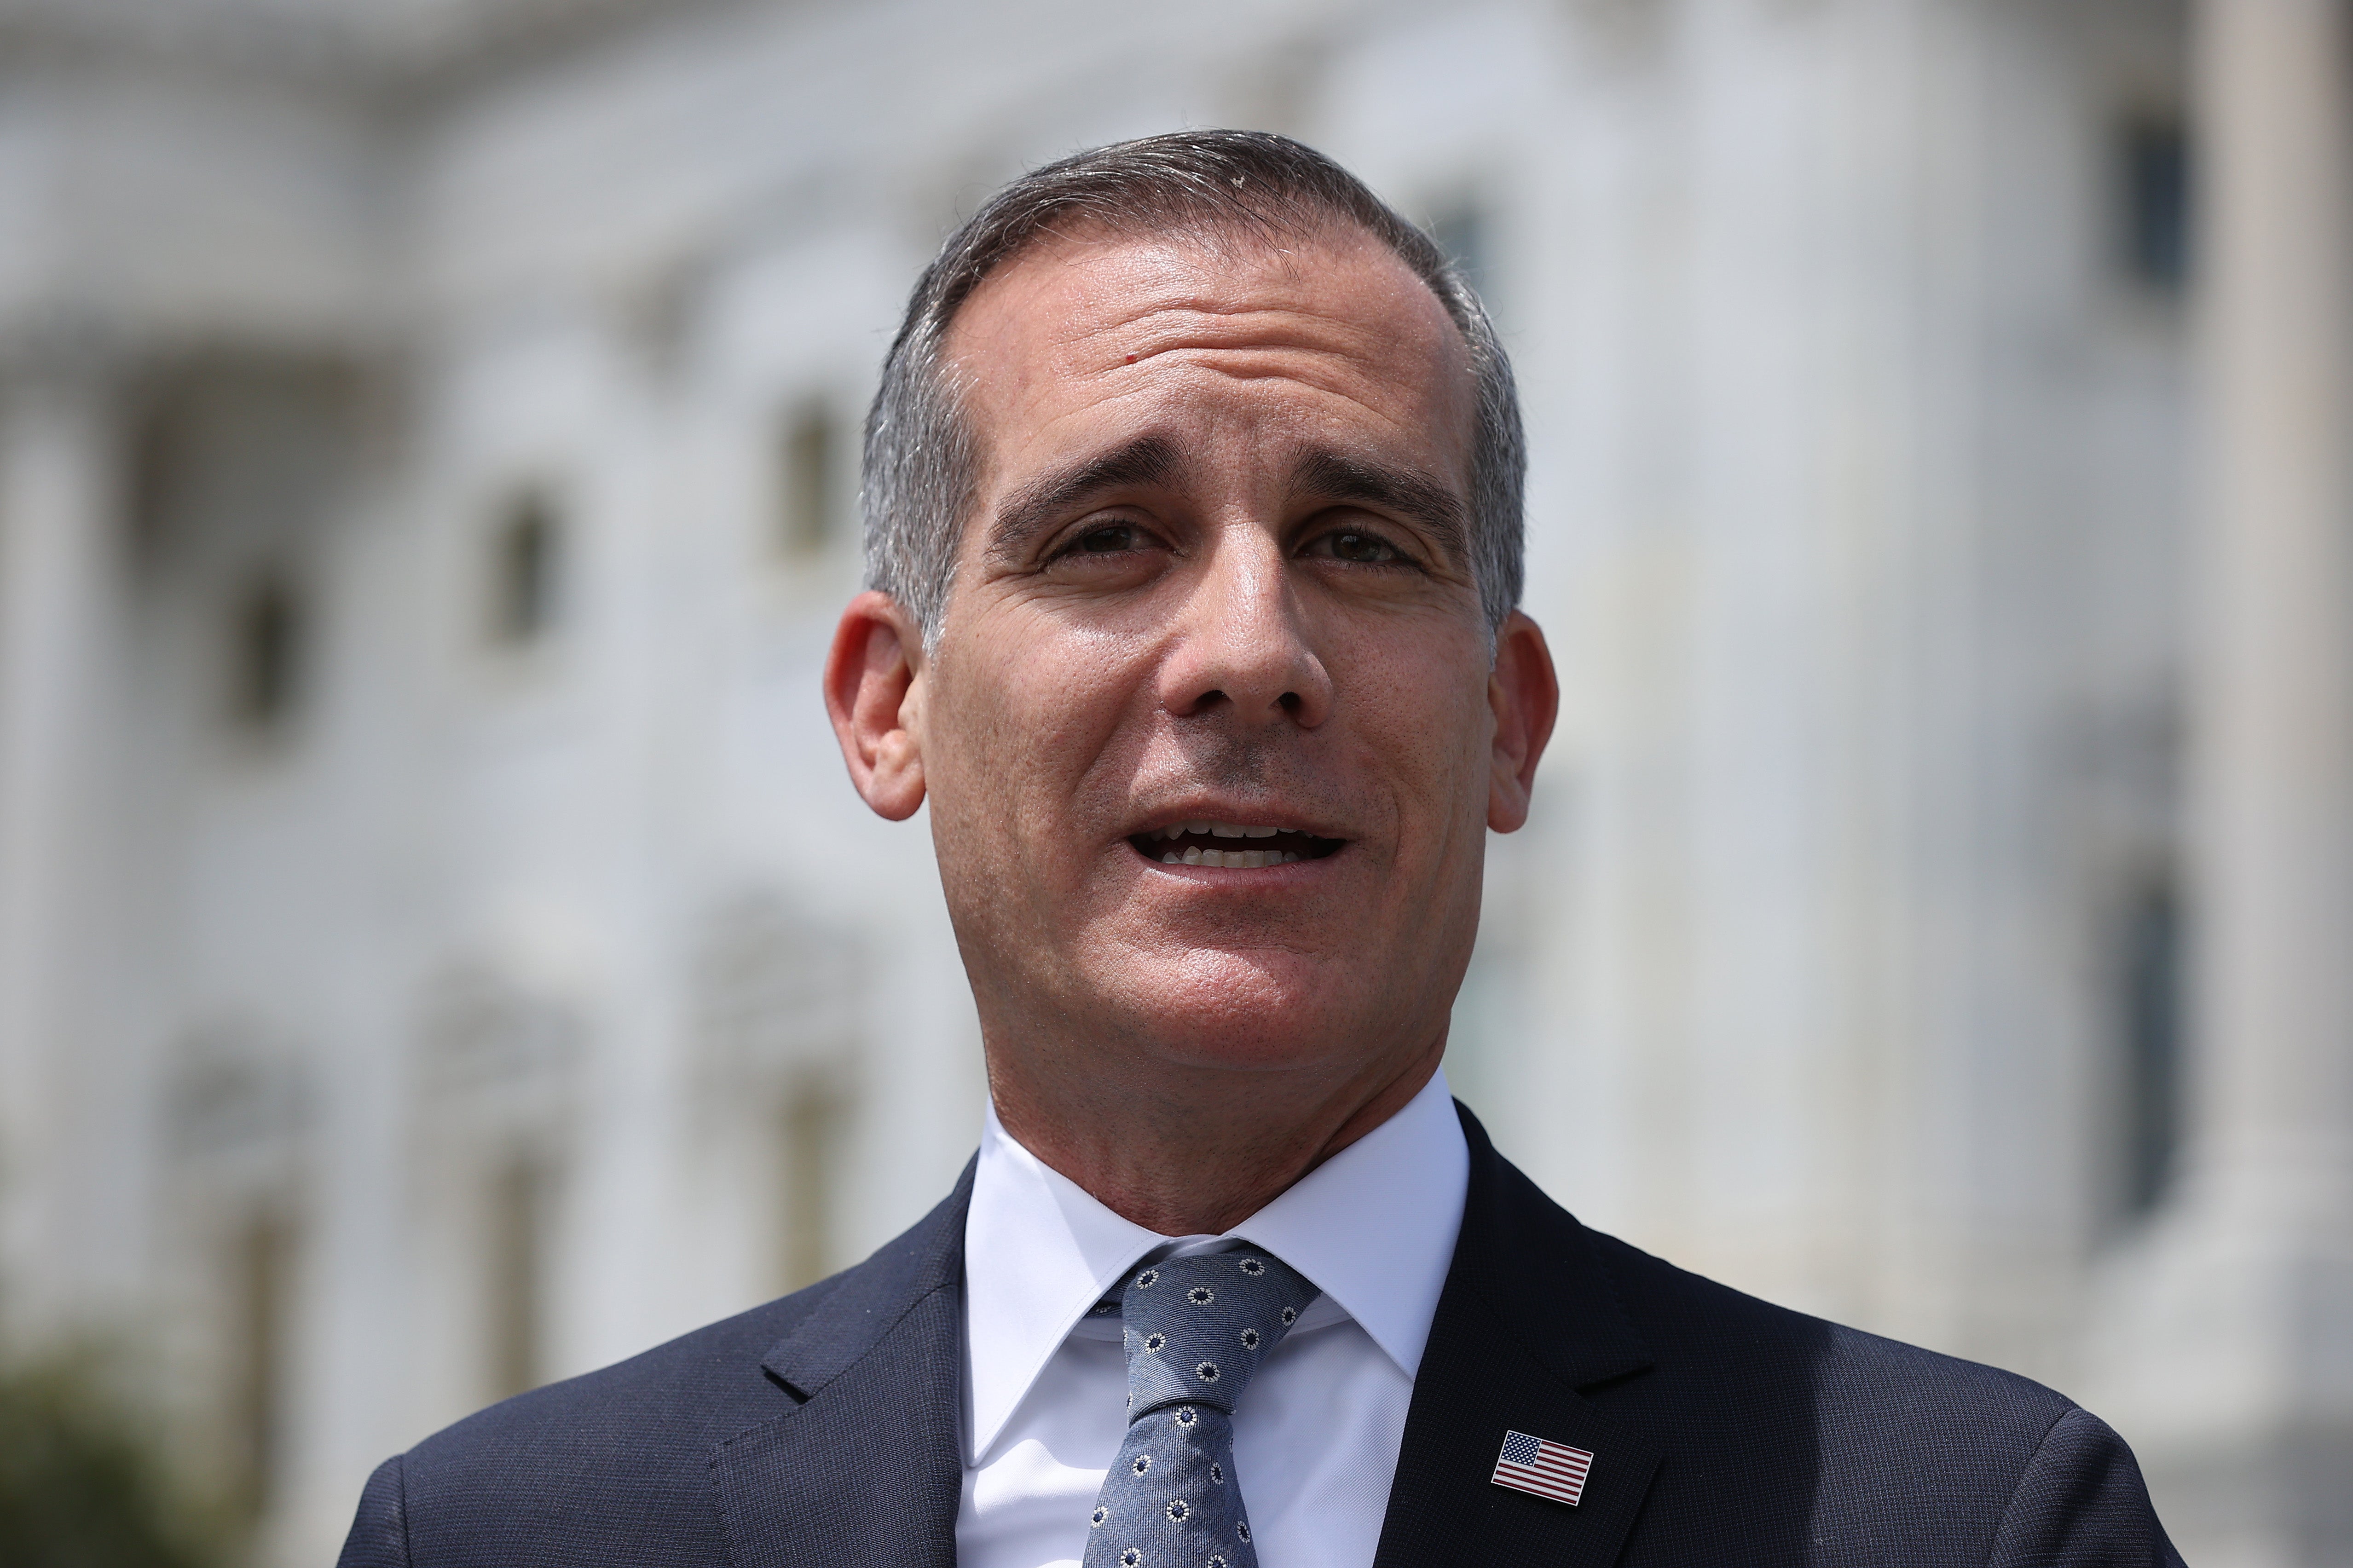 Los Angeles Mayor Eric Garcetti has faced criticism over soaring homicide rates in the city